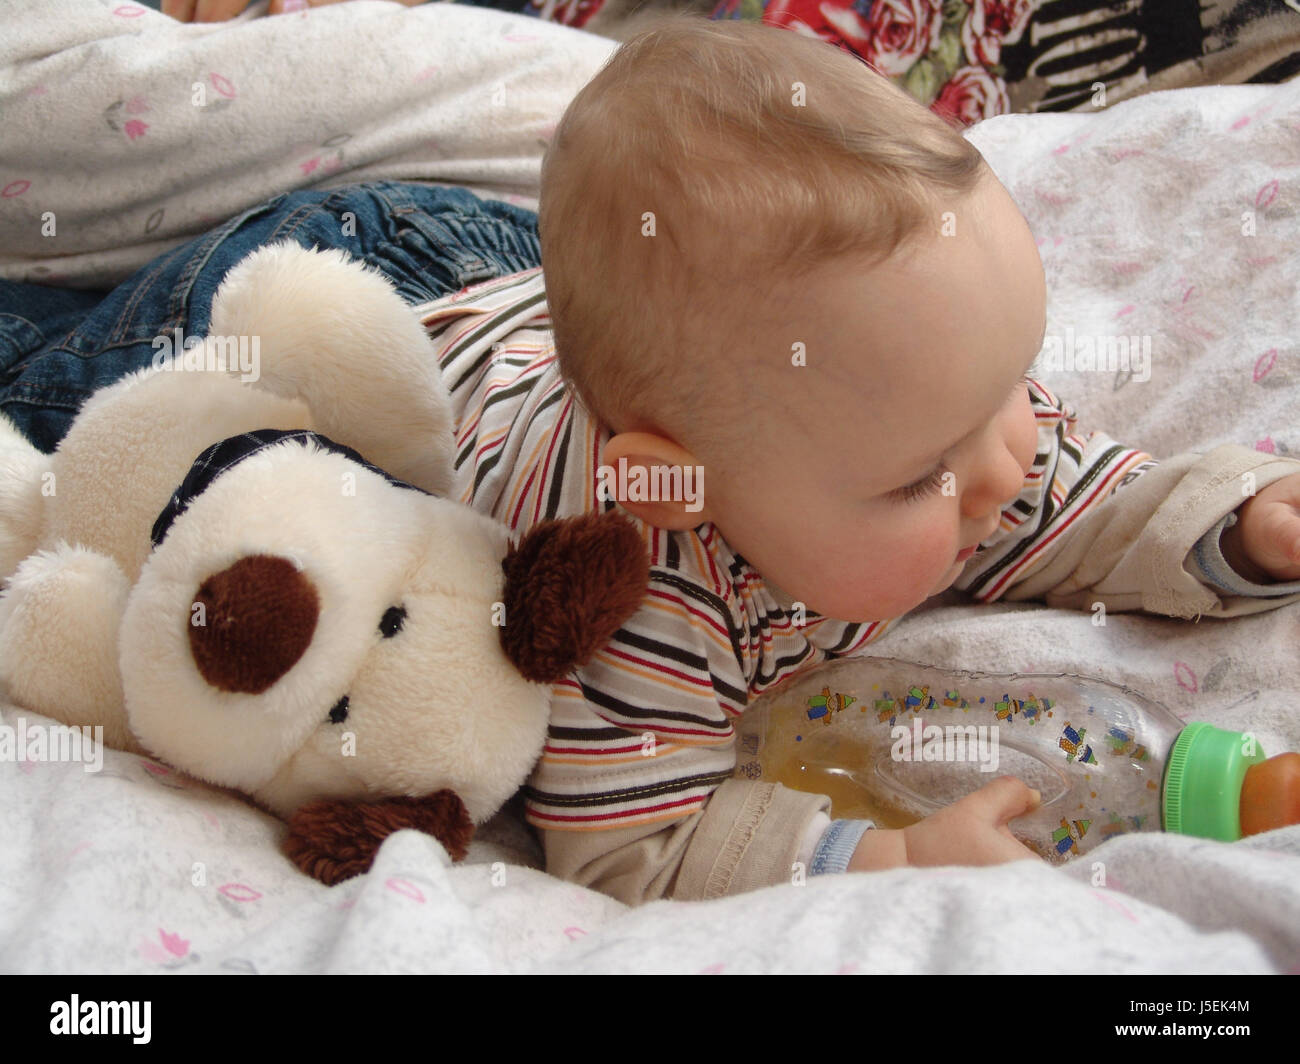 game tournament play playing plays played bed curiosity curious nosey nosy baby Stock Photo